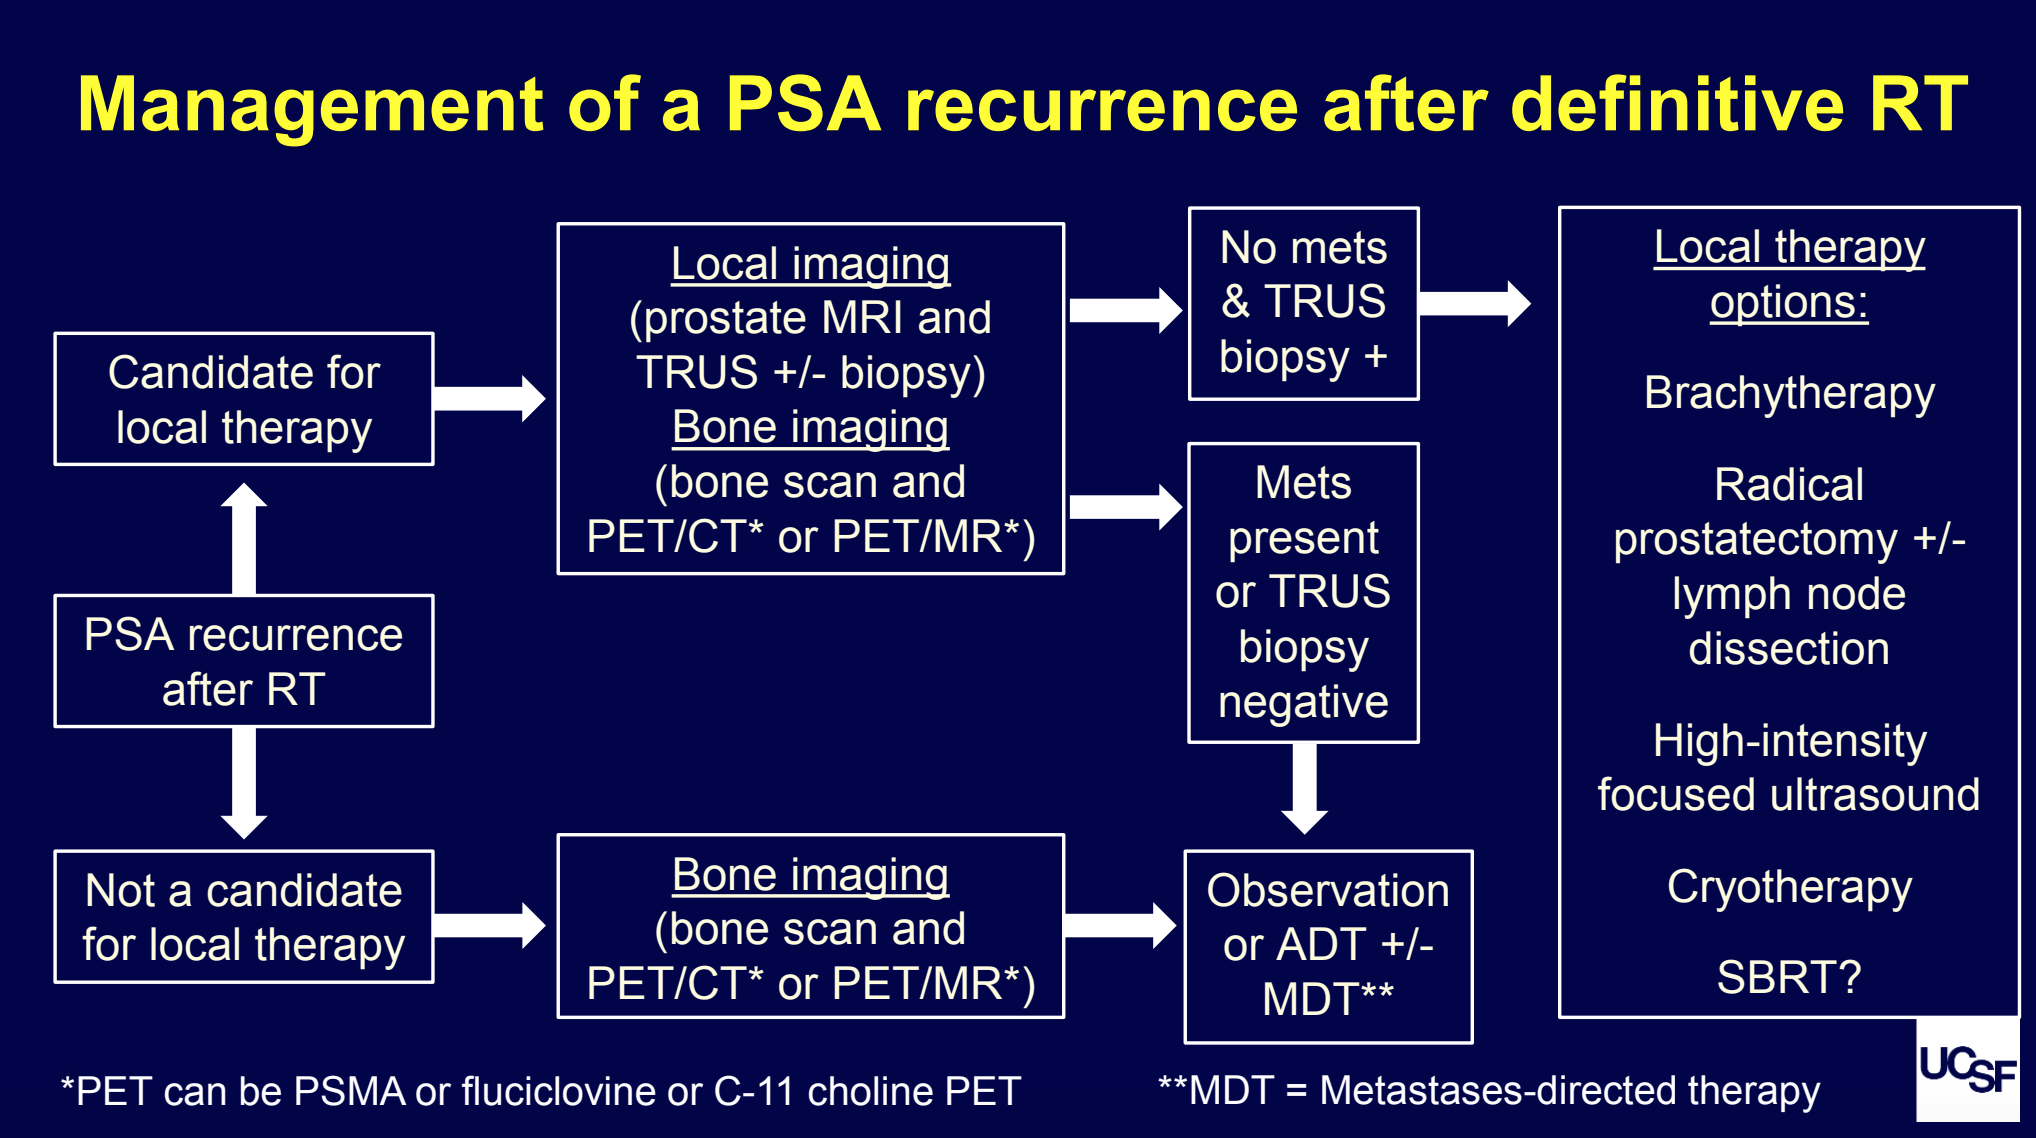 Management of PSA Recurrence After Definitive RT